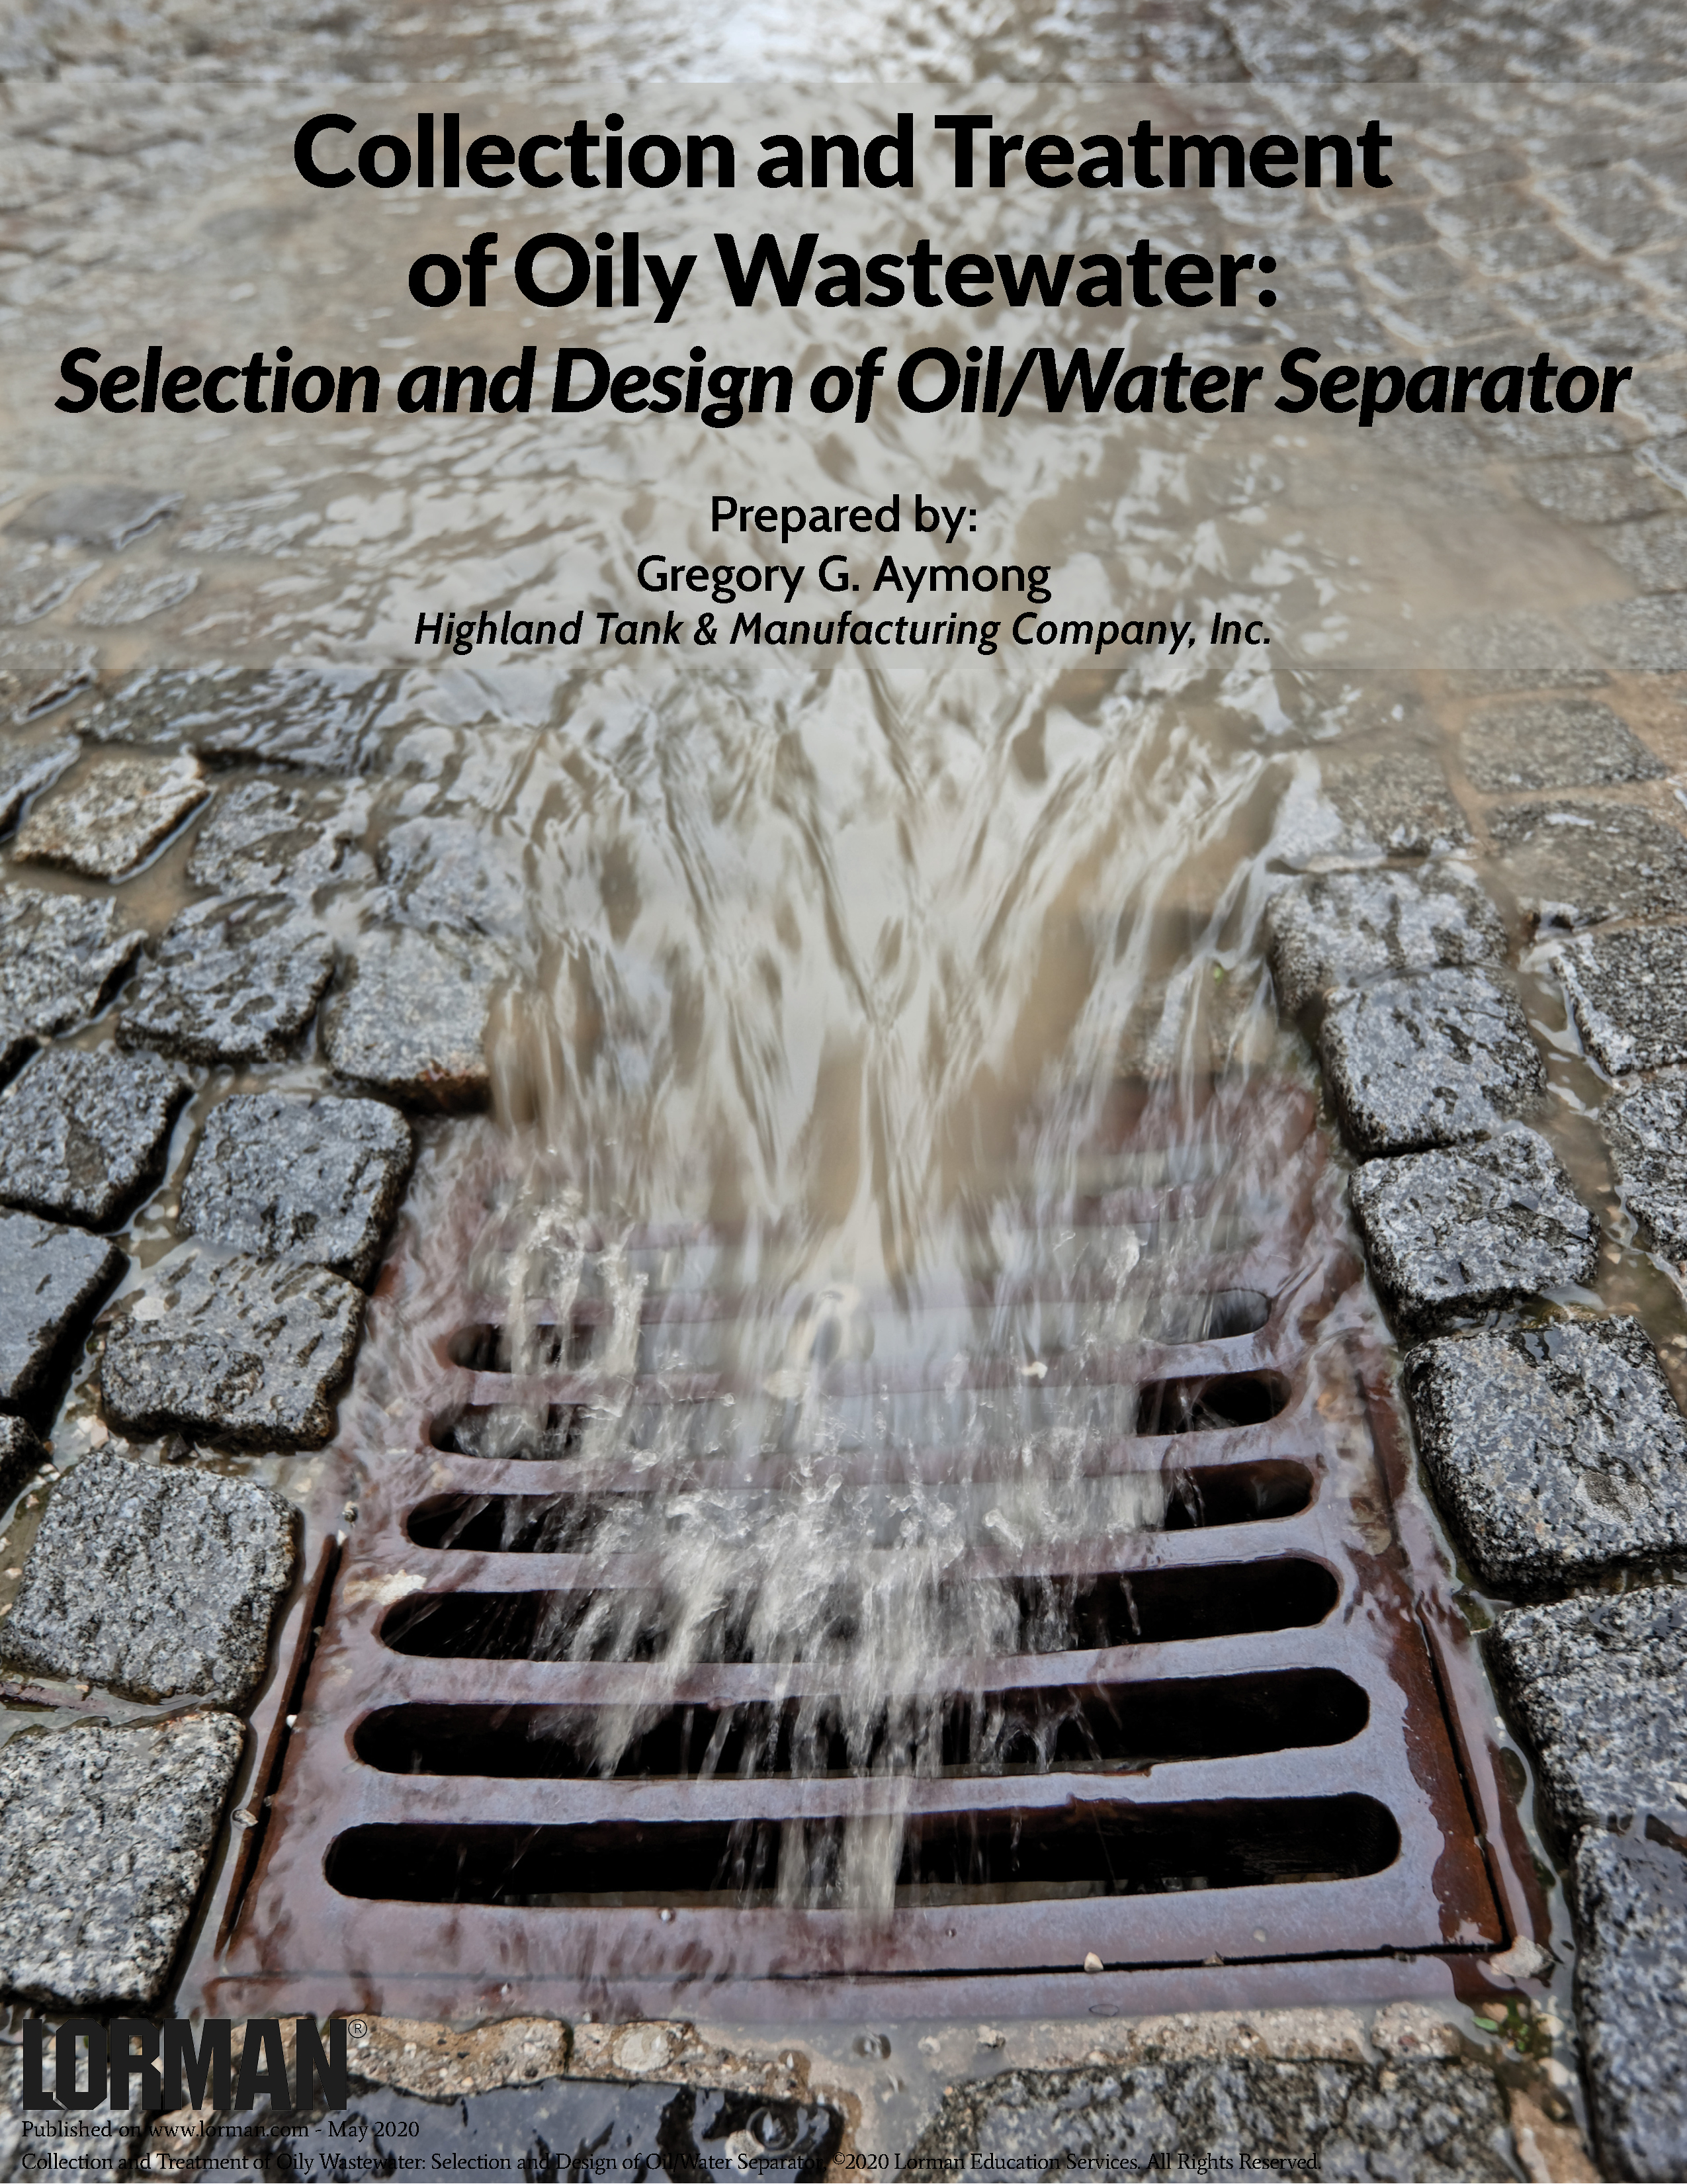 Collection and Treatment of Oily Wastewater: Selection and Design of Oil/Water Separator